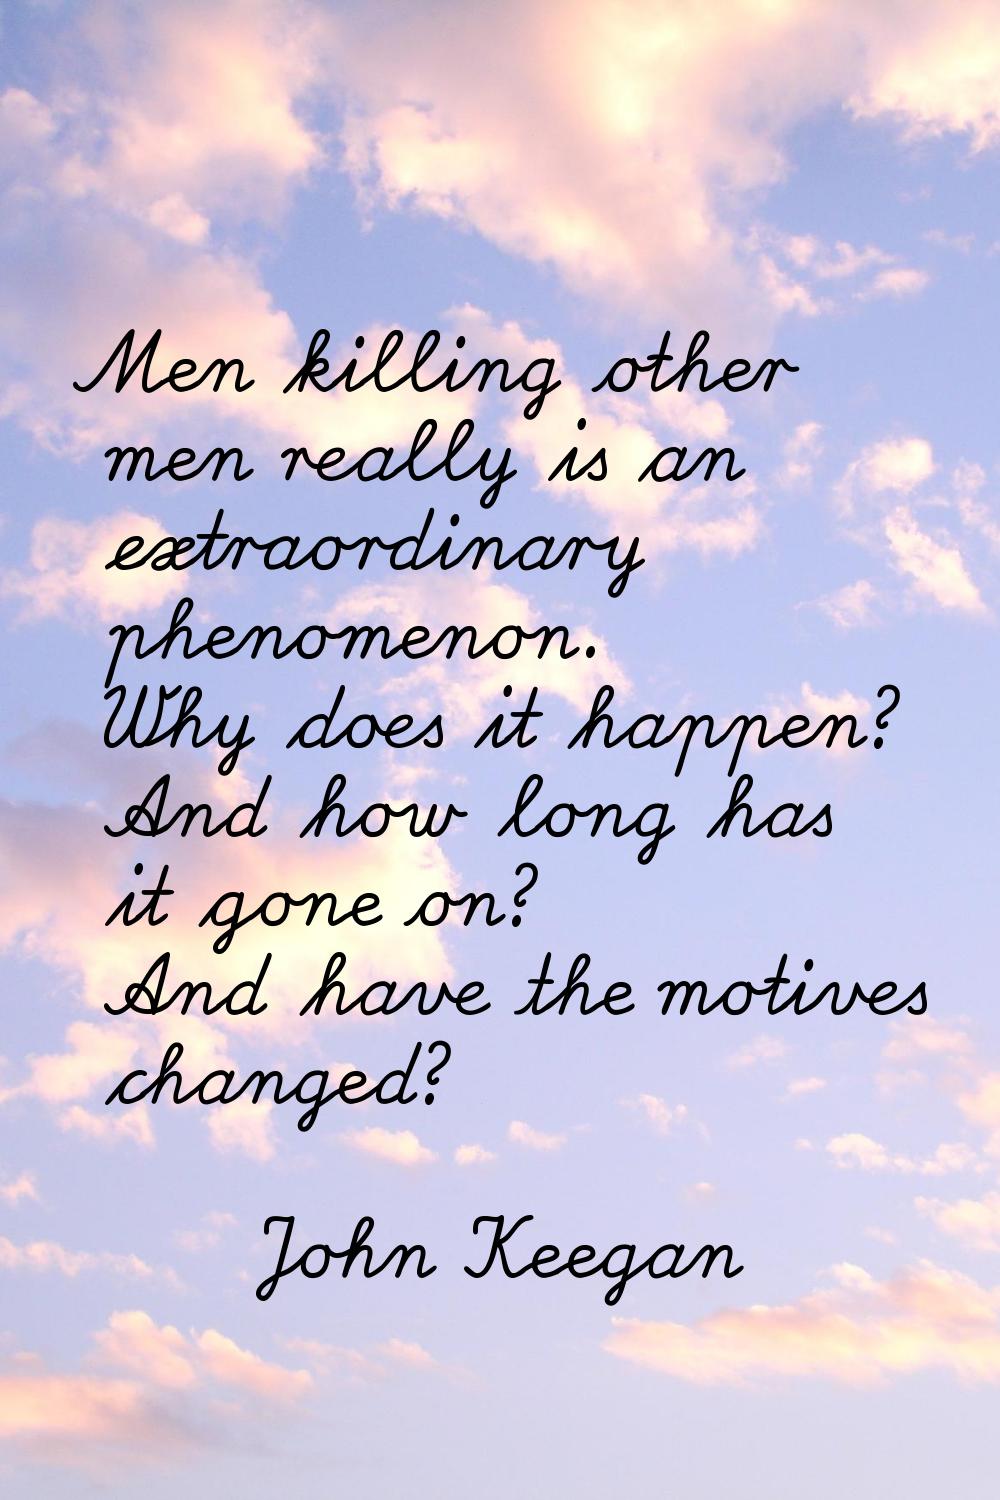 Men killing other men really is an extraordinary phenomenon. Why does it happen? And how long has i